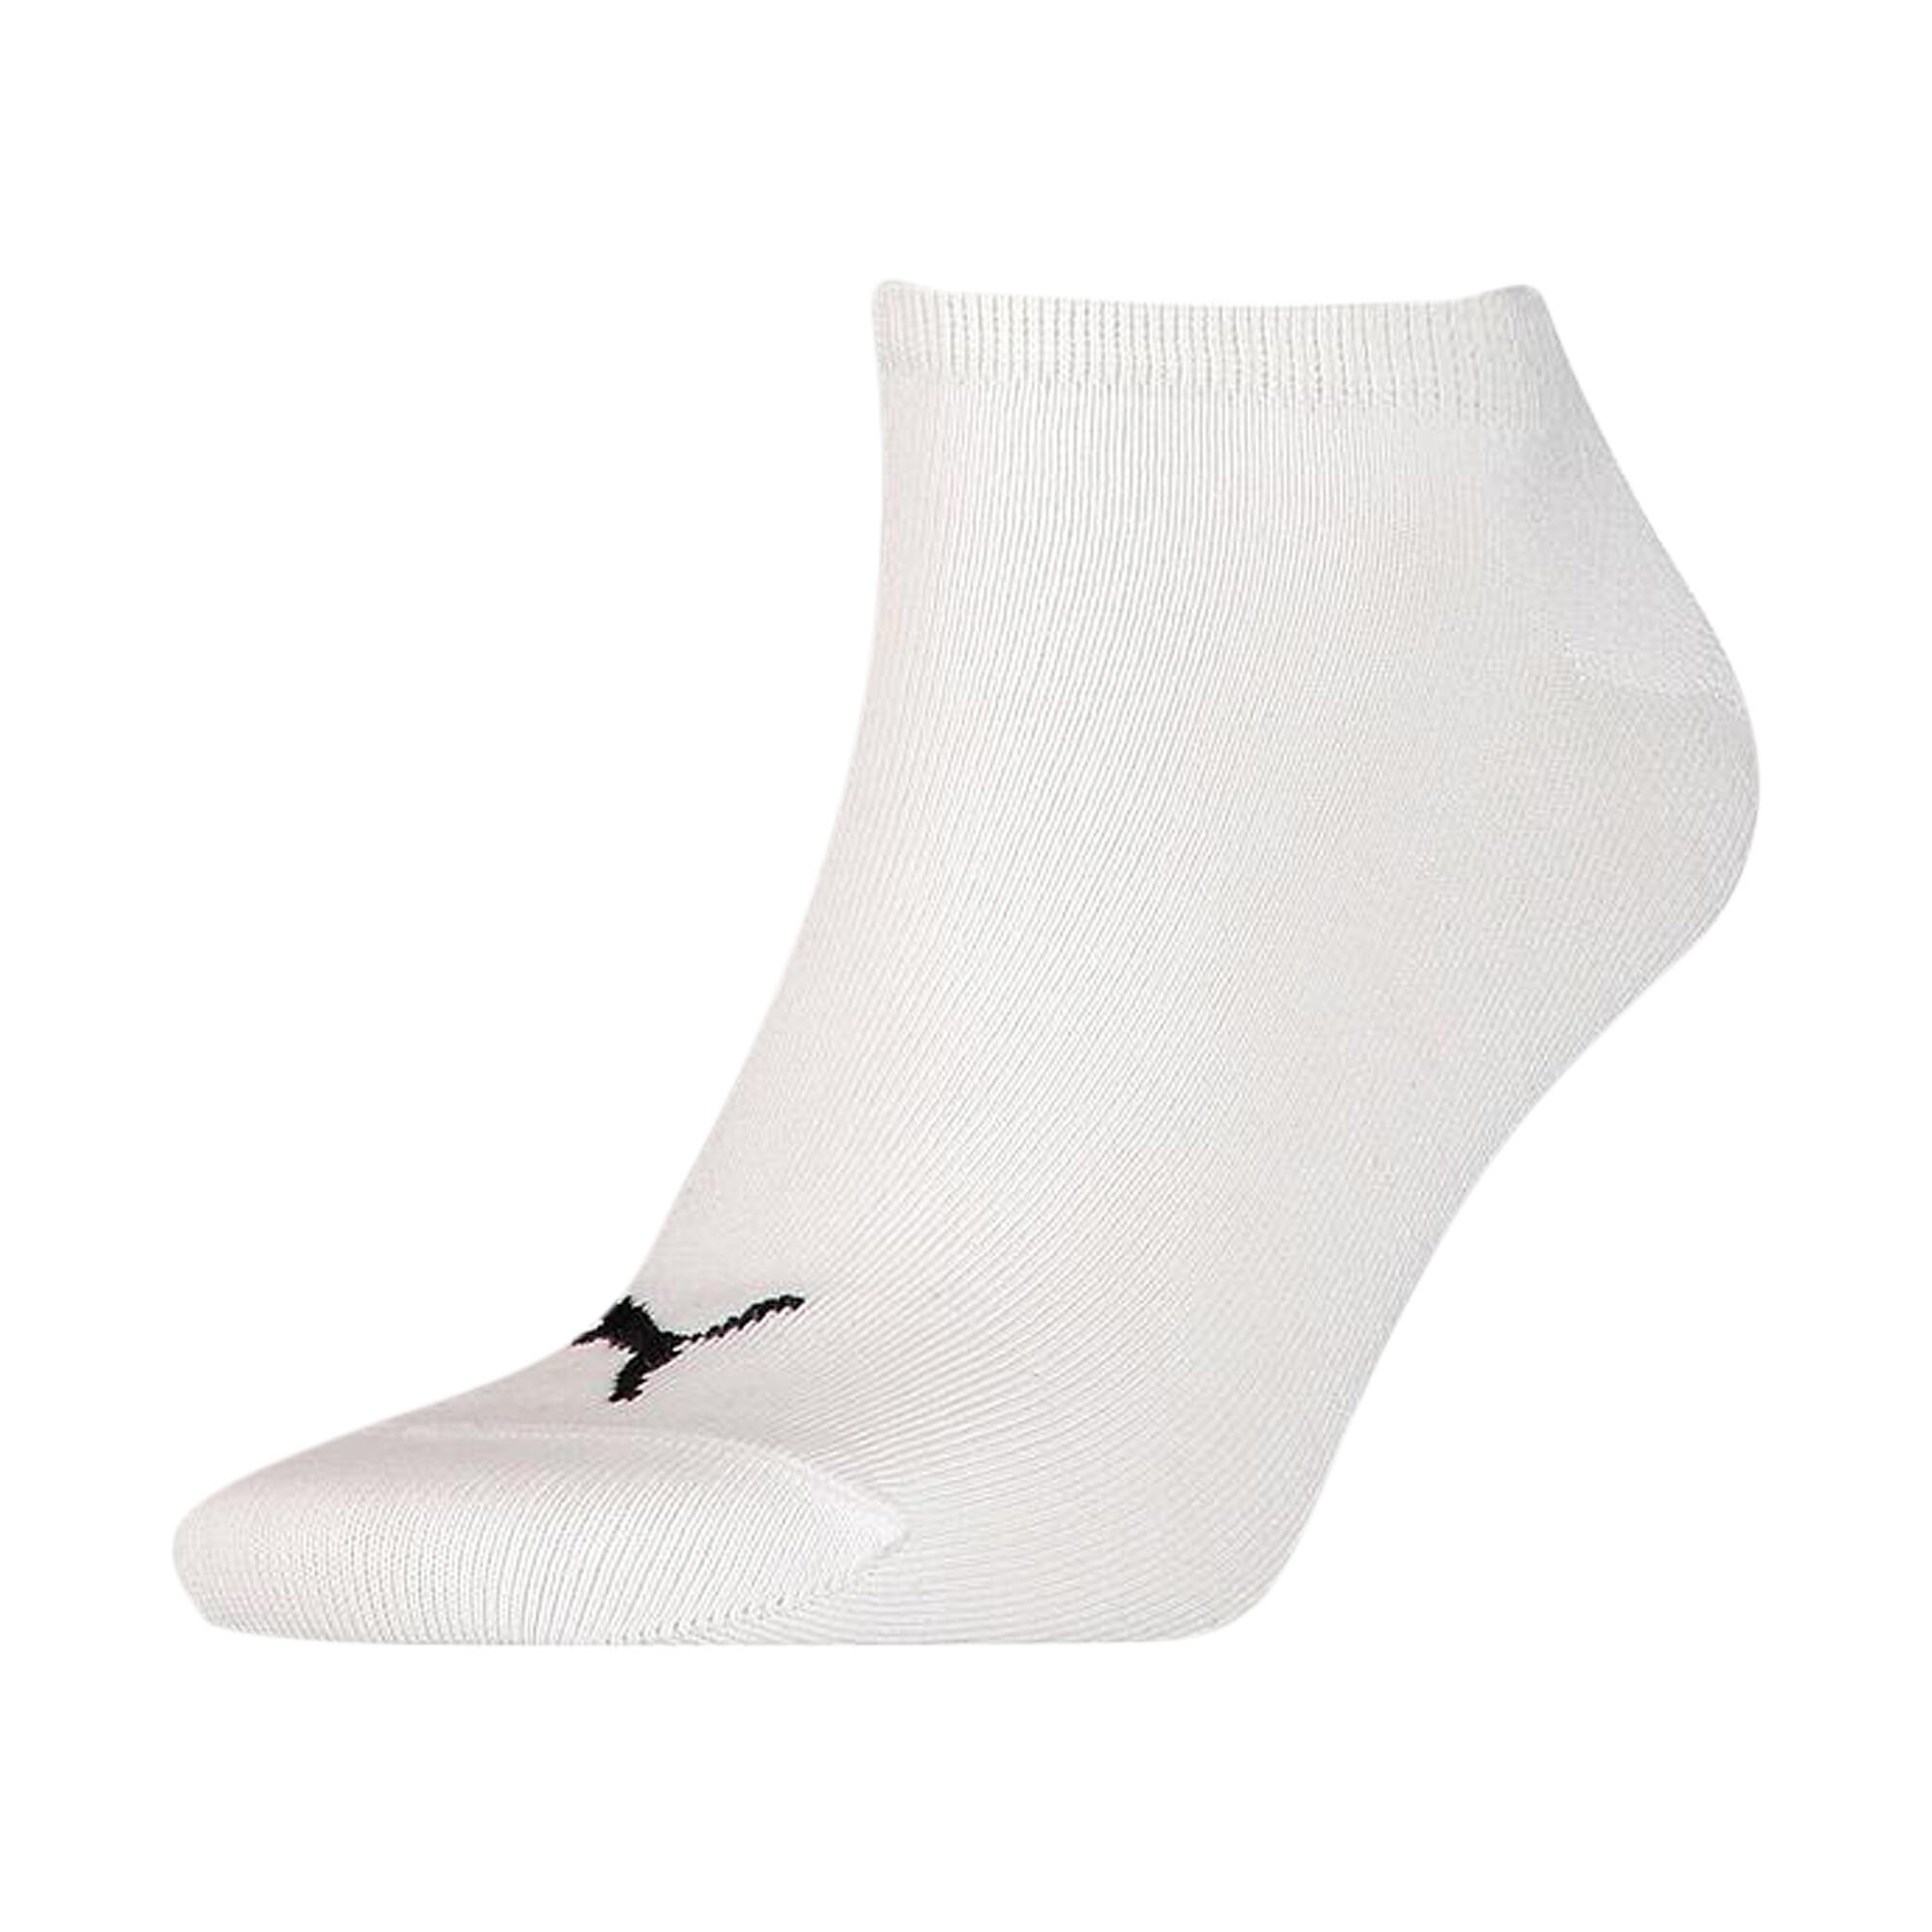 PUMA Unisex Adult Invisible Socks (Pack of 3) (White)